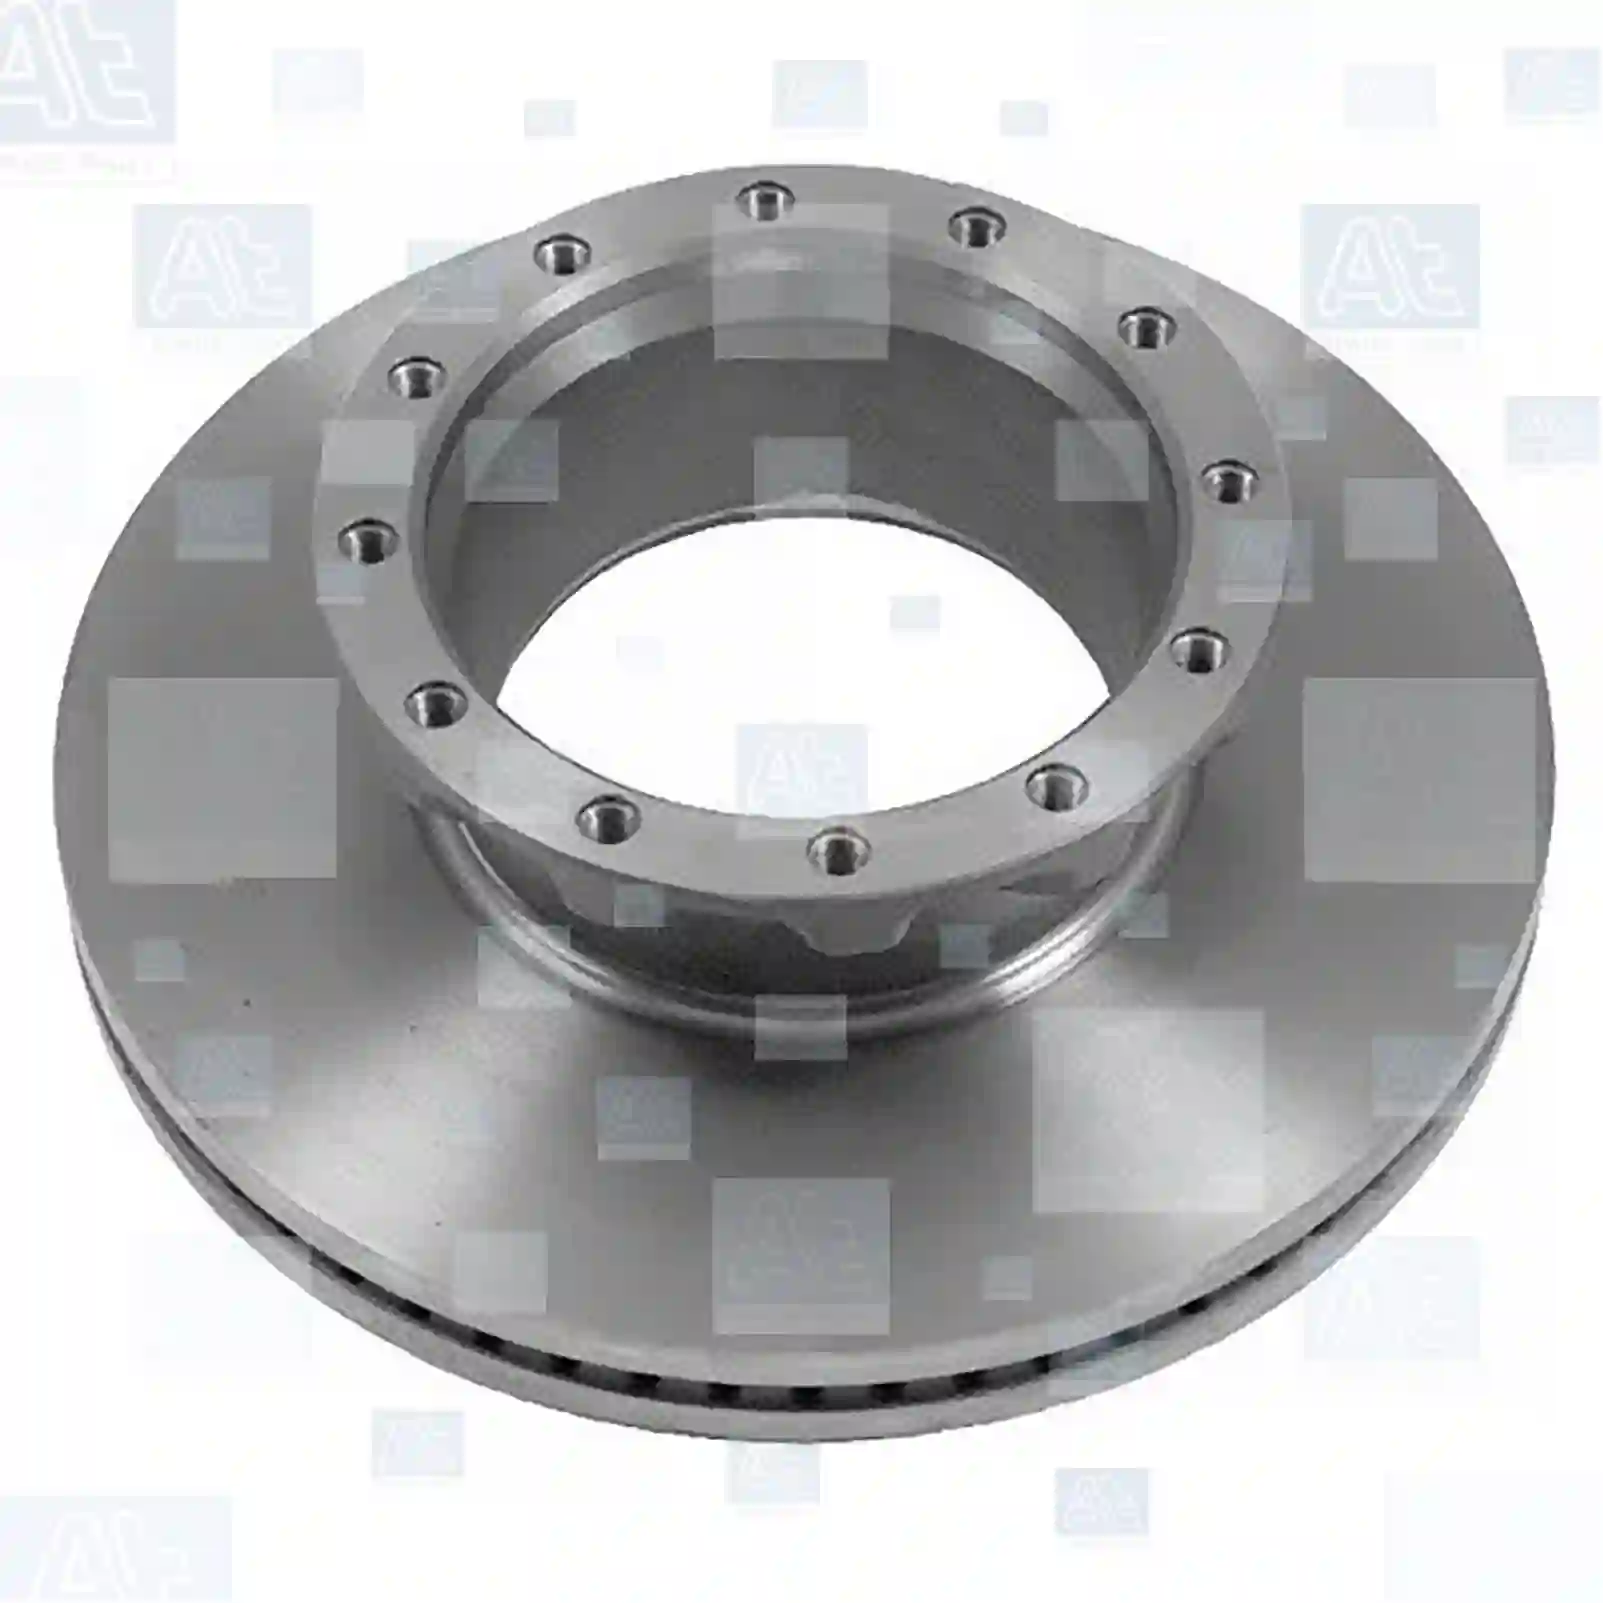 Brake disc, 77714743, 234110, 1137179, 1521148, 1525365, 1962280, 65847039, 657126, 657303, 658517, 658537, 42541277, 36508030000, N1011015508, 0004200172, 0004200272, 0004210312, 000234110, 011015508, 072136218, 080455010, 082133300, 082135830, MBR5032, 1415147, 8285000589, 82850005890, 8285472000, 821358300, ZG50196-0008 ||  77714743 At Spare Part | Engine, Accelerator Pedal, Camshaft, Connecting Rod, Crankcase, Crankshaft, Cylinder Head, Engine Suspension Mountings, Exhaust Manifold, Exhaust Gas Recirculation, Filter Kits, Flywheel Housing, General Overhaul Kits, Engine, Intake Manifold, Oil Cleaner, Oil Cooler, Oil Filter, Oil Pump, Oil Sump, Piston & Liner, Sensor & Switch, Timing Case, Turbocharger, Cooling System, Belt Tensioner, Coolant Filter, Coolant Pipe, Corrosion Prevention Agent, Drive, Expansion Tank, Fan, Intercooler, Monitors & Gauges, Radiator, Thermostat, V-Belt / Timing belt, Water Pump, Fuel System, Electronical Injector Unit, Feed Pump, Fuel Filter, cpl., Fuel Gauge Sender,  Fuel Line, Fuel Pump, Fuel Tank, Injection Line Kit, Injection Pump, Exhaust System, Clutch & Pedal, Gearbox, Propeller Shaft, Axles, Brake System, Hubs & Wheels, Suspension, Leaf Spring, Universal Parts / Accessories, Steering, Electrical System, Cabin Brake disc, 77714743, 234110, 1137179, 1521148, 1525365, 1962280, 65847039, 657126, 657303, 658517, 658537, 42541277, 36508030000, N1011015508, 0004200172, 0004200272, 0004210312, 000234110, 011015508, 072136218, 080455010, 082133300, 082135830, MBR5032, 1415147, 8285000589, 82850005890, 8285472000, 821358300, ZG50196-0008 ||  77714743 At Spare Part | Engine, Accelerator Pedal, Camshaft, Connecting Rod, Crankcase, Crankshaft, Cylinder Head, Engine Suspension Mountings, Exhaust Manifold, Exhaust Gas Recirculation, Filter Kits, Flywheel Housing, General Overhaul Kits, Engine, Intake Manifold, Oil Cleaner, Oil Cooler, Oil Filter, Oil Pump, Oil Sump, Piston & Liner, Sensor & Switch, Timing Case, Turbocharger, Cooling System, Belt Tensioner, Coolant Filter, Coolant Pipe, Corrosion Prevention Agent, Drive, Expansion Tank, Fan, Intercooler, Monitors & Gauges, Radiator, Thermostat, V-Belt / Timing belt, Water Pump, Fuel System, Electronical Injector Unit, Feed Pump, Fuel Filter, cpl., Fuel Gauge Sender,  Fuel Line, Fuel Pump, Fuel Tank, Injection Line Kit, Injection Pump, Exhaust System, Clutch & Pedal, Gearbox, Propeller Shaft, Axles, Brake System, Hubs & Wheels, Suspension, Leaf Spring, Universal Parts / Accessories, Steering, Electrical System, Cabin